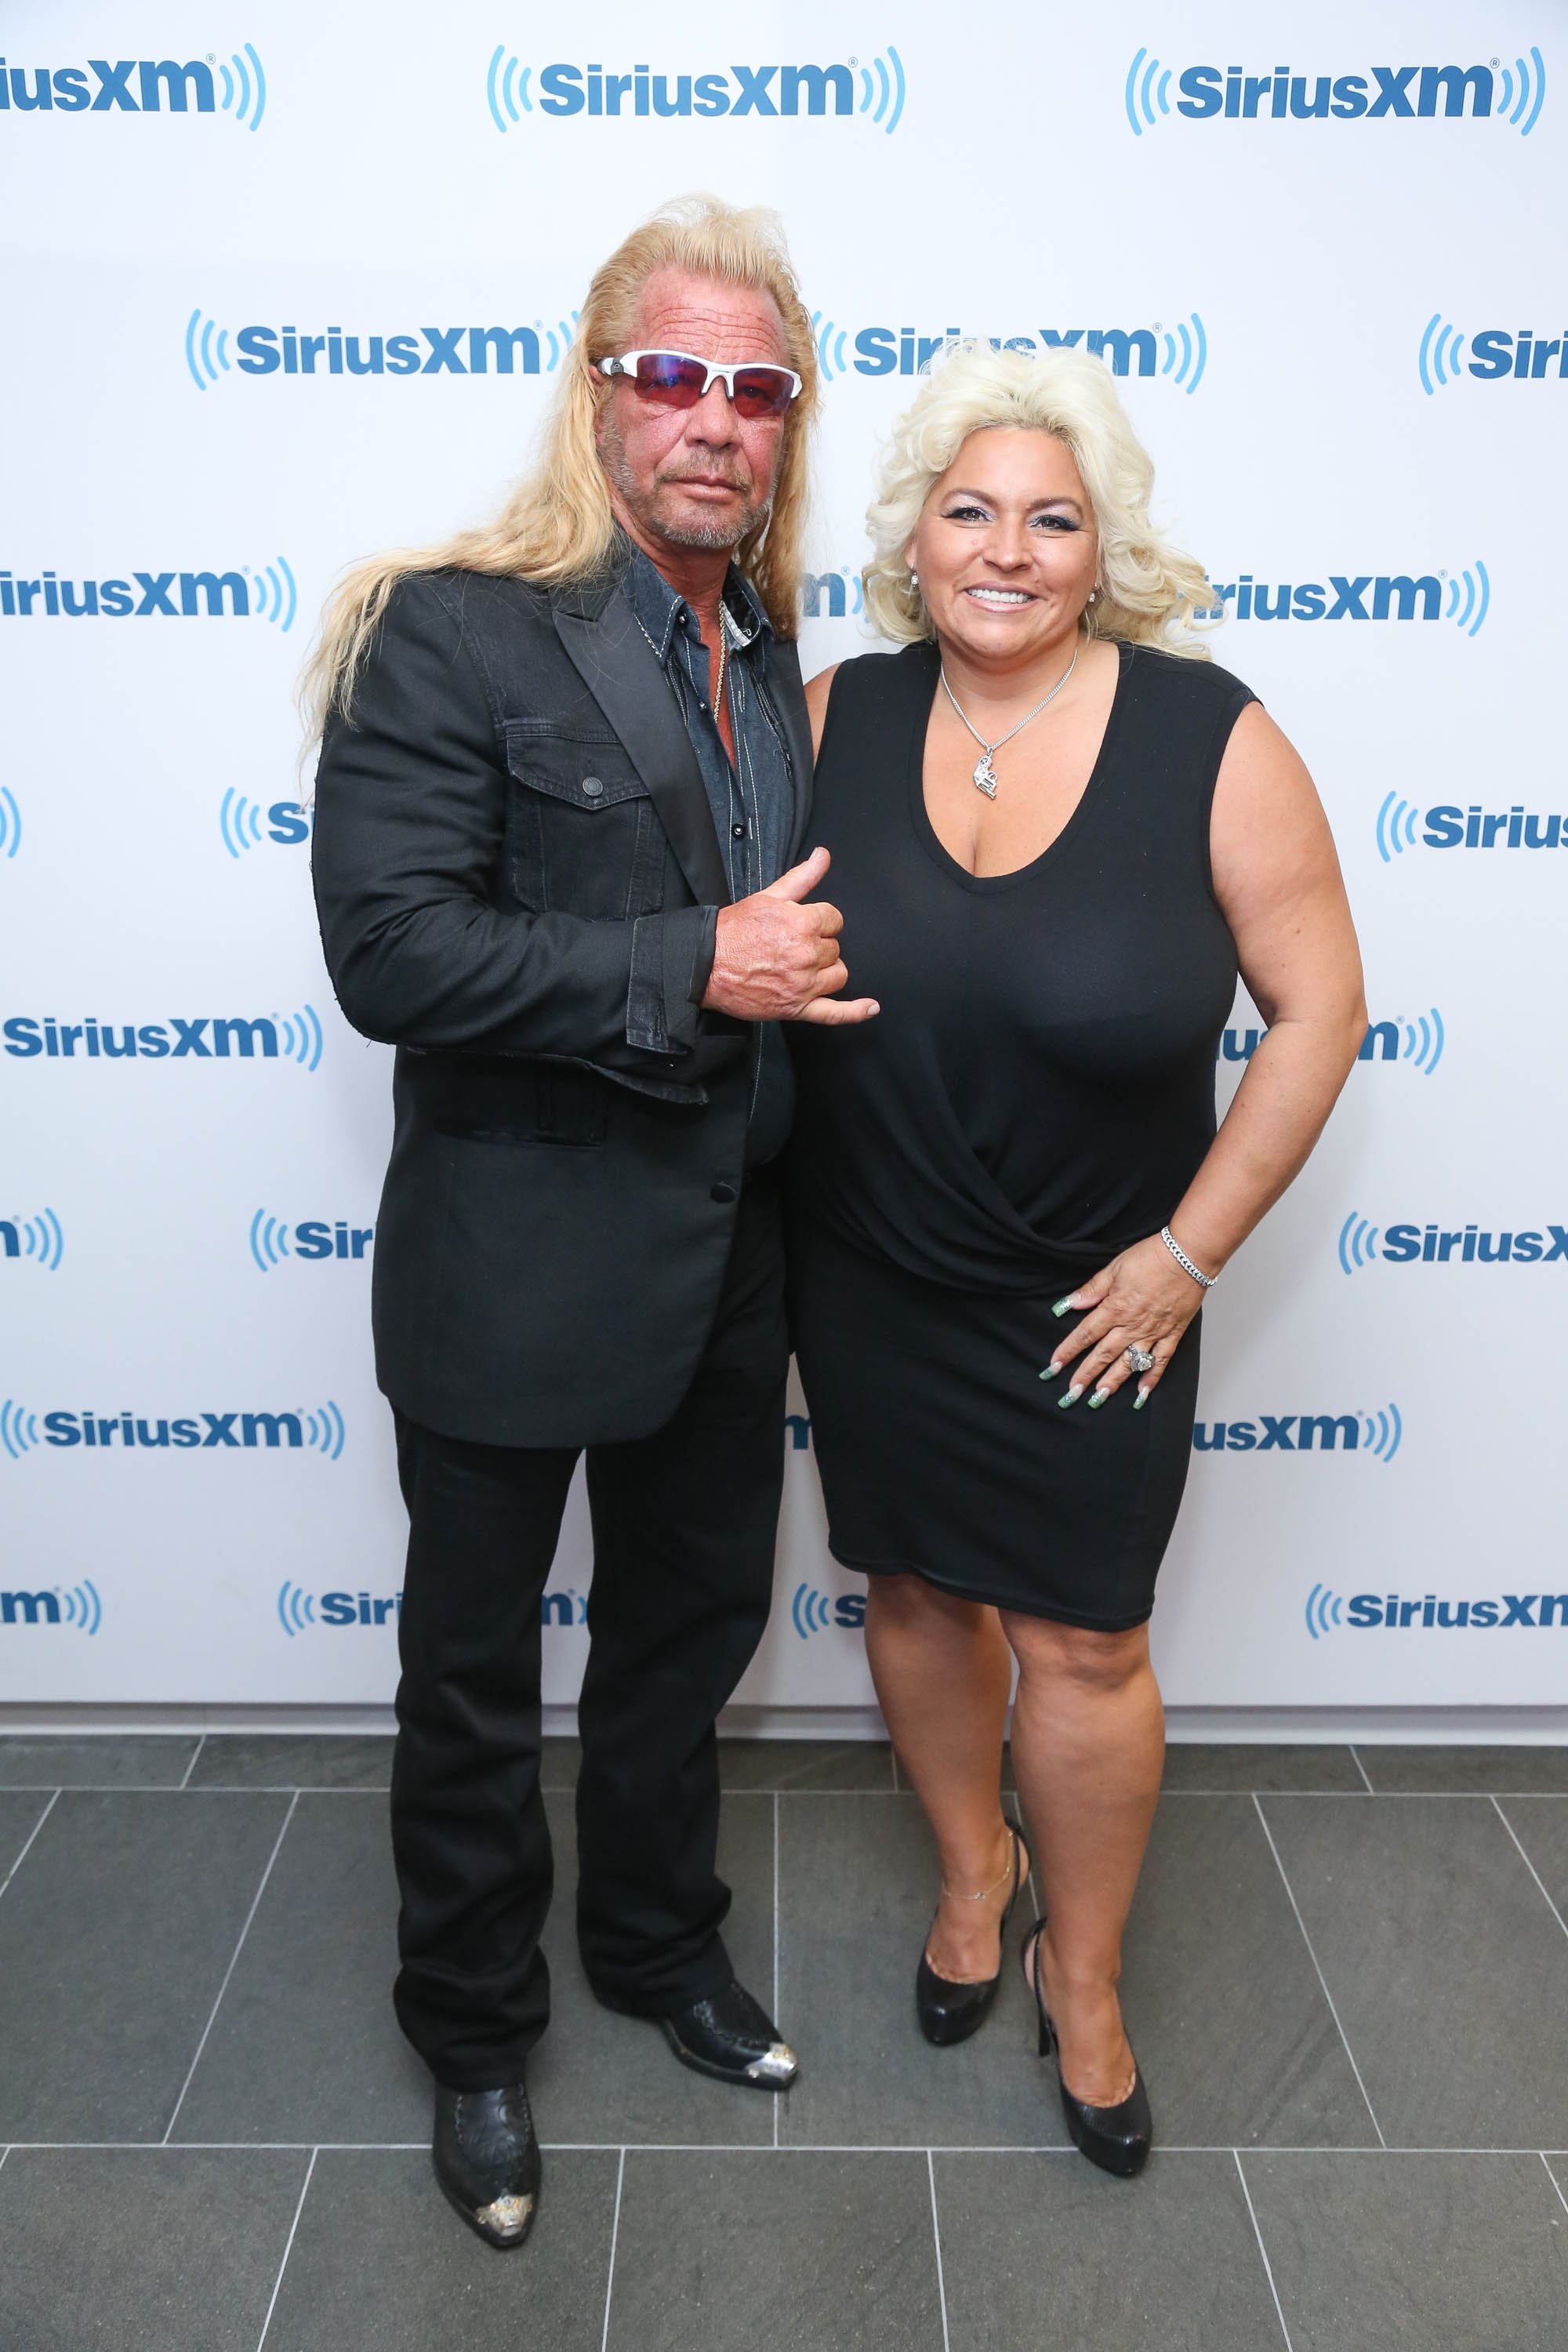 Duane 'Dog' and Beth Chapman visit at SiriusXM Studios on June 9, 2014 in New York City | Photo: Getty Images